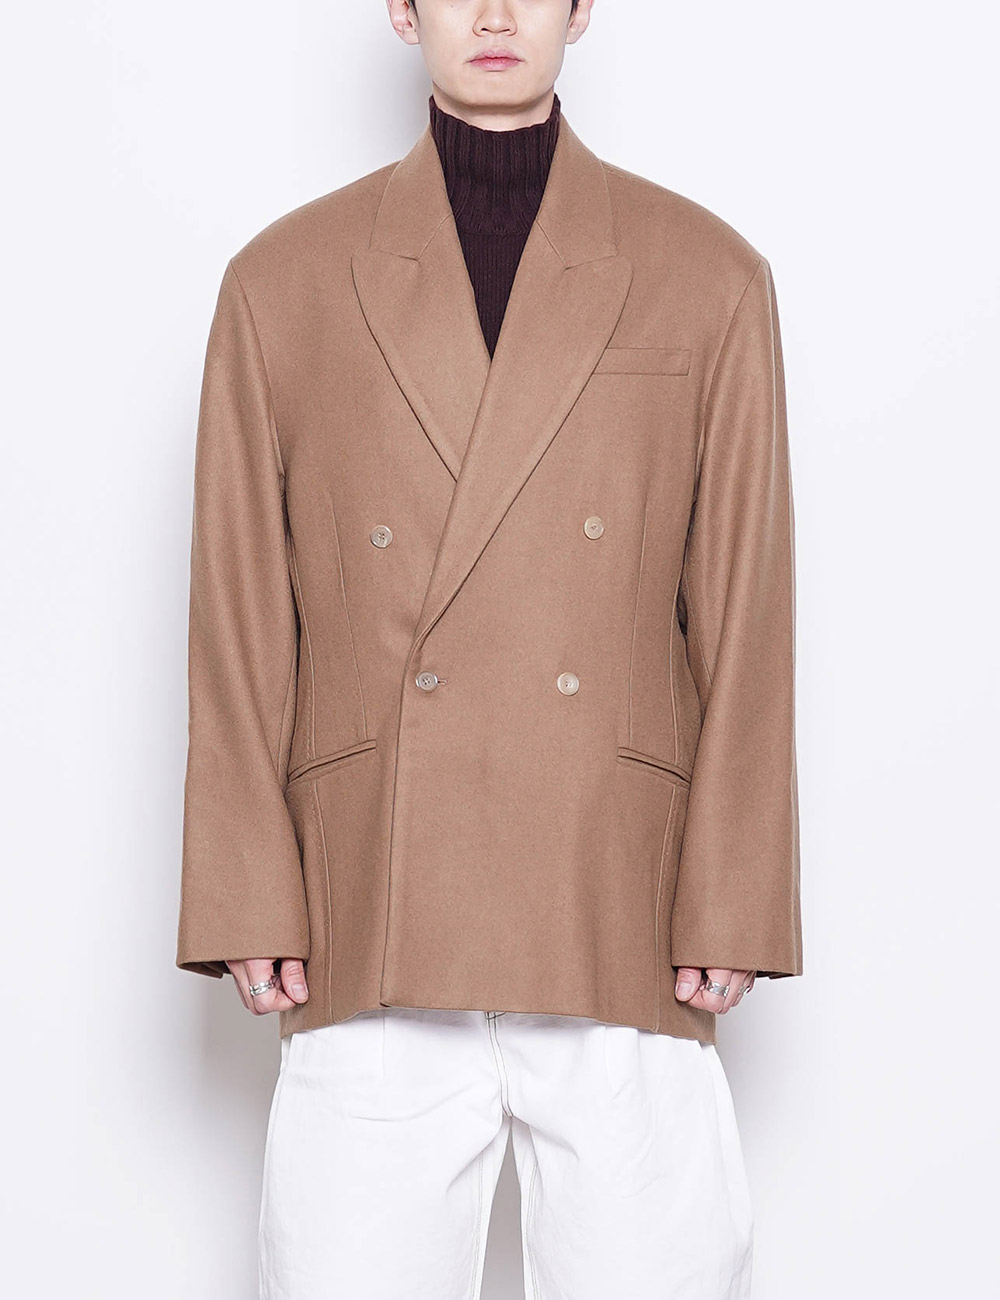 HED MAYNER : DROPPED BACK DOUBLE BREASTED JACKET (CAMEL)